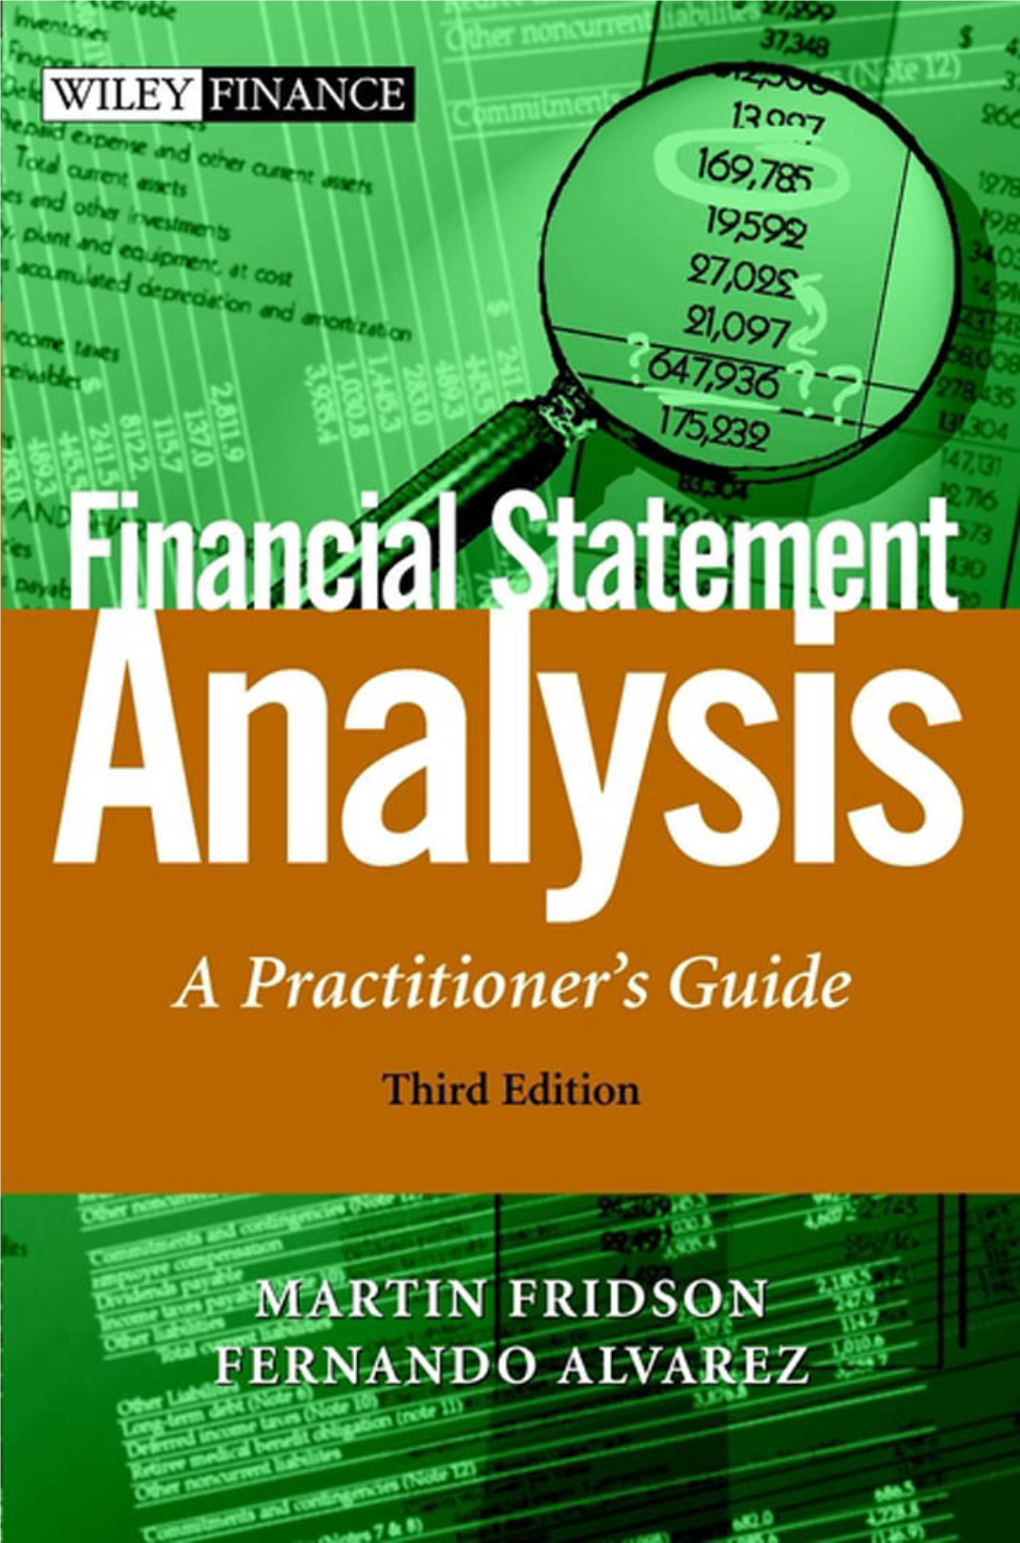 Financial Statement Analysis: a Practitioner's Guide, 3Rd Edition